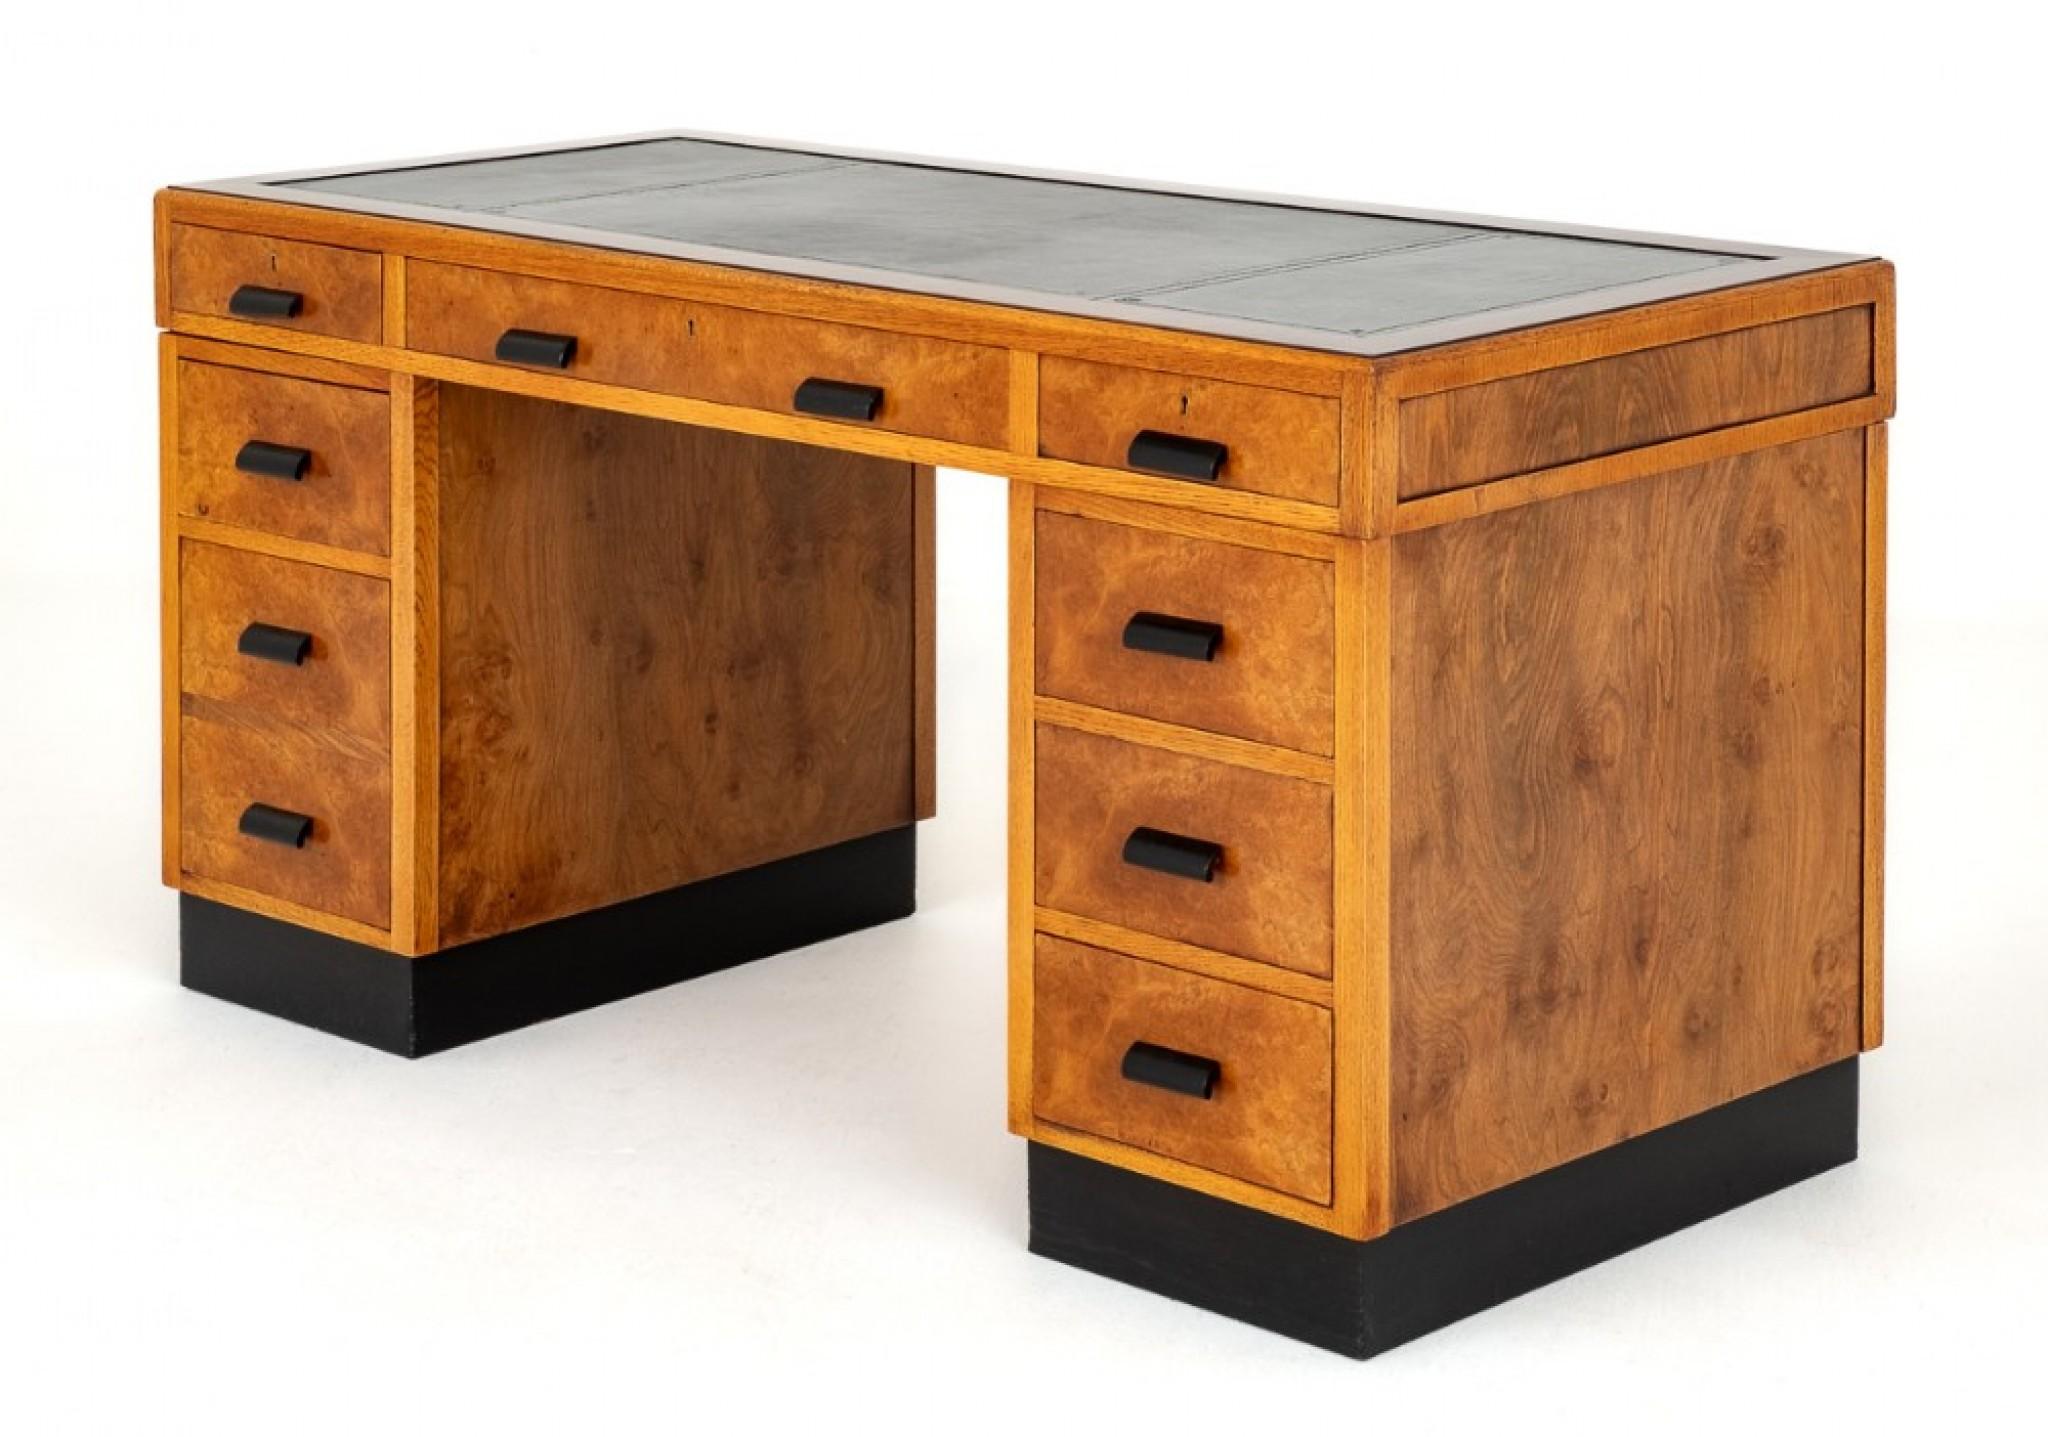 Art Deco Walnut Desk.
This Wonderful 9 Drawer Desk Stands upon a Typical Art Deco Ebonised Plinth.
The Desk Having 9 Mahogany Lined Working Drawers With Ebonised Handles.
The Desk is Veneered in a Quality Burr Walnut.
The Top of the Desk Features